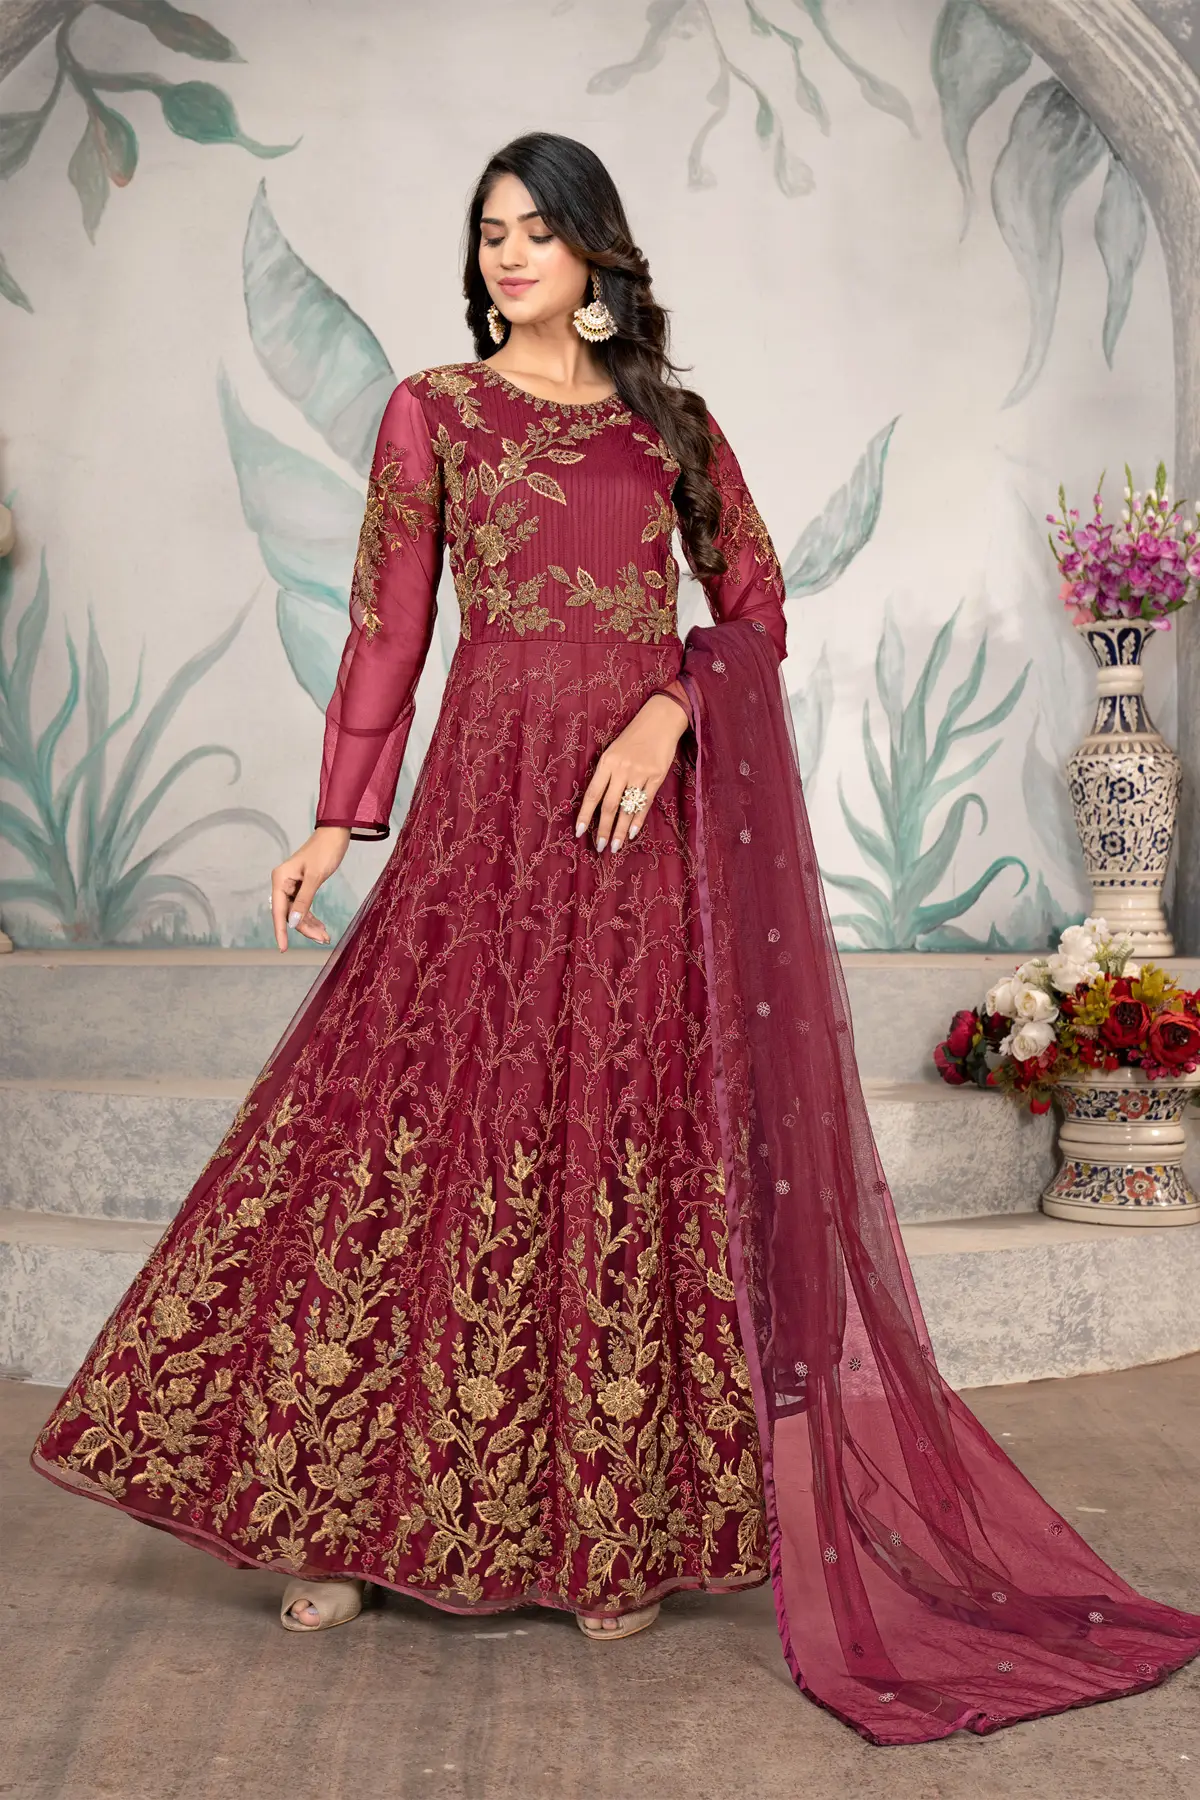 buy Anarkali Floor Touch Suits online in USA Canada Australia Mauritius India Worldwide